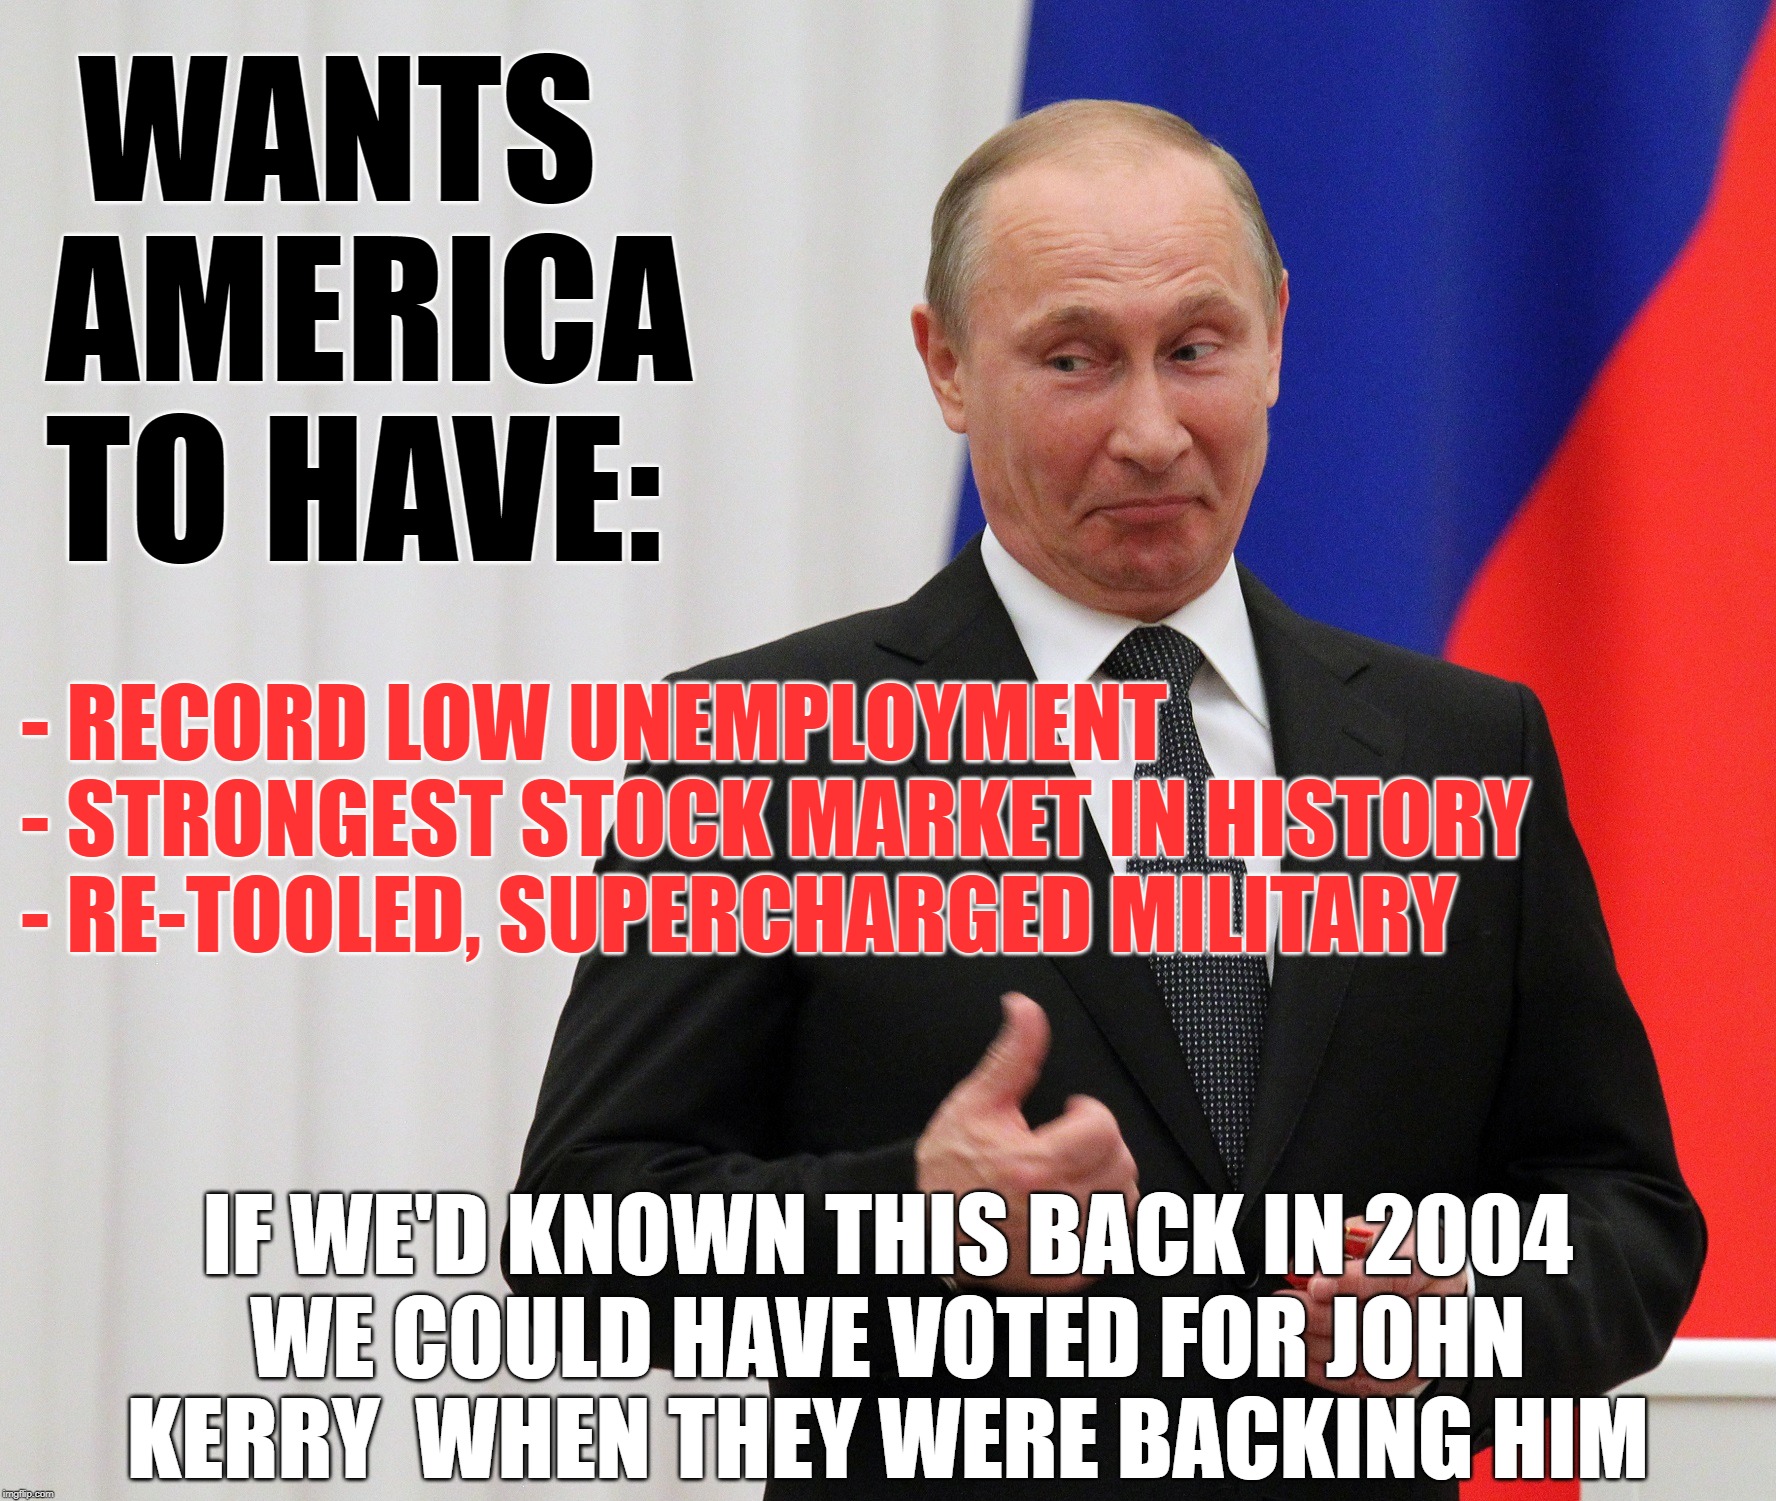 WANTS AMERICA TO HAVE:; - RECORD LOW UNEMPLOYMENT
- STRONGEST STOCK MARKET IN HISTORY
- RE-TOOLED, SUPERCHARGED MILITARY; IF WE'D KNOWN THIS BACK IN 2004; WE COULD HAVE VOTED FOR JOHN KERRY  WHEN THEY WERE BACKING HIM | image tagged in trump landslide 2020,maga,tds,putin | made w/ Imgflip meme maker